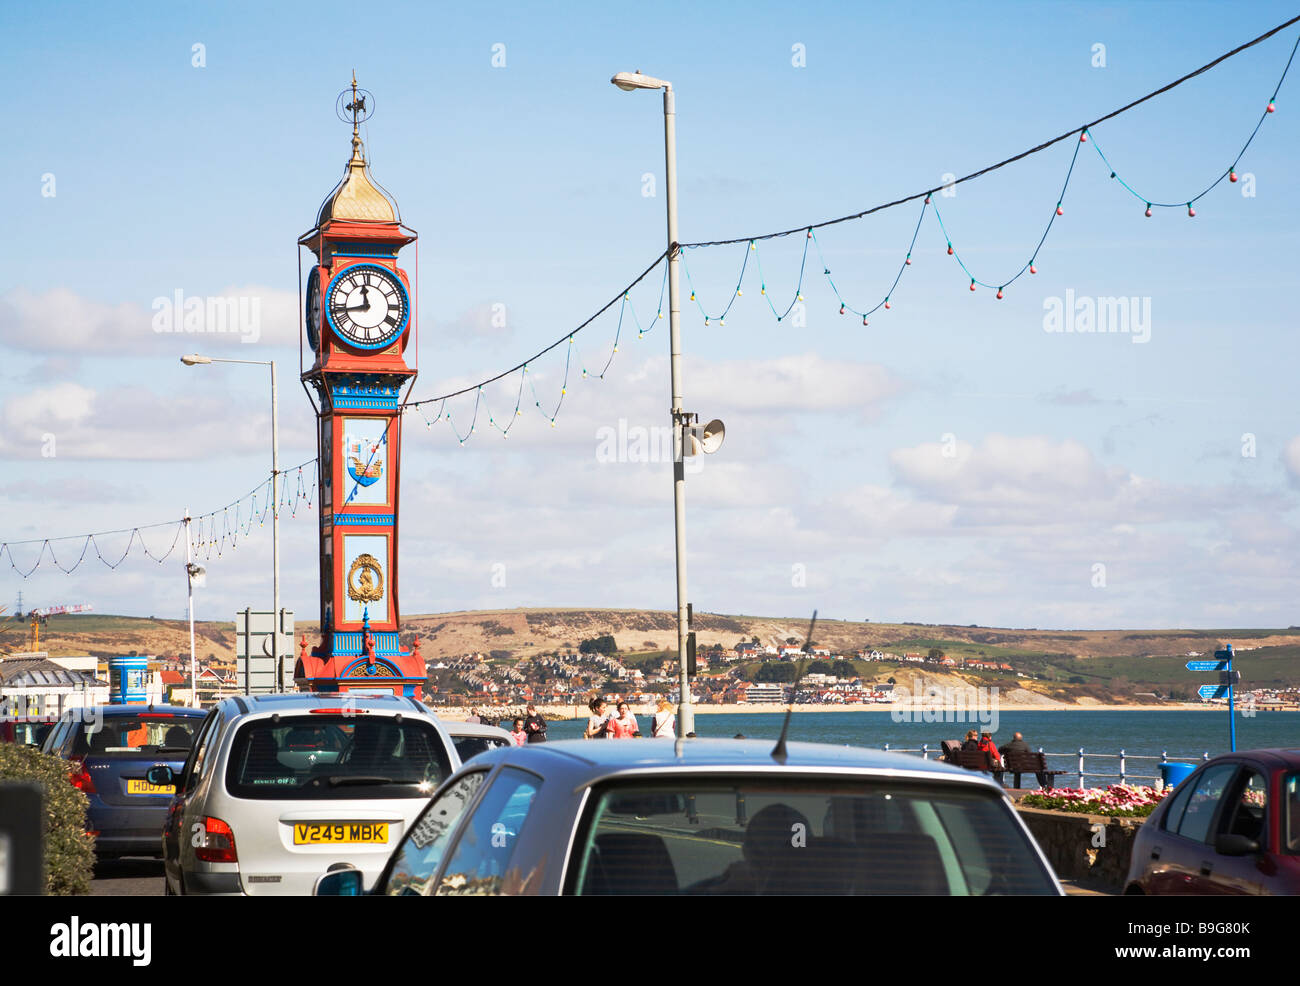 Jubilee clock and traffic along the busy seafront road. Seaside town of Weymouth, Dorset. UK. Stock Photo